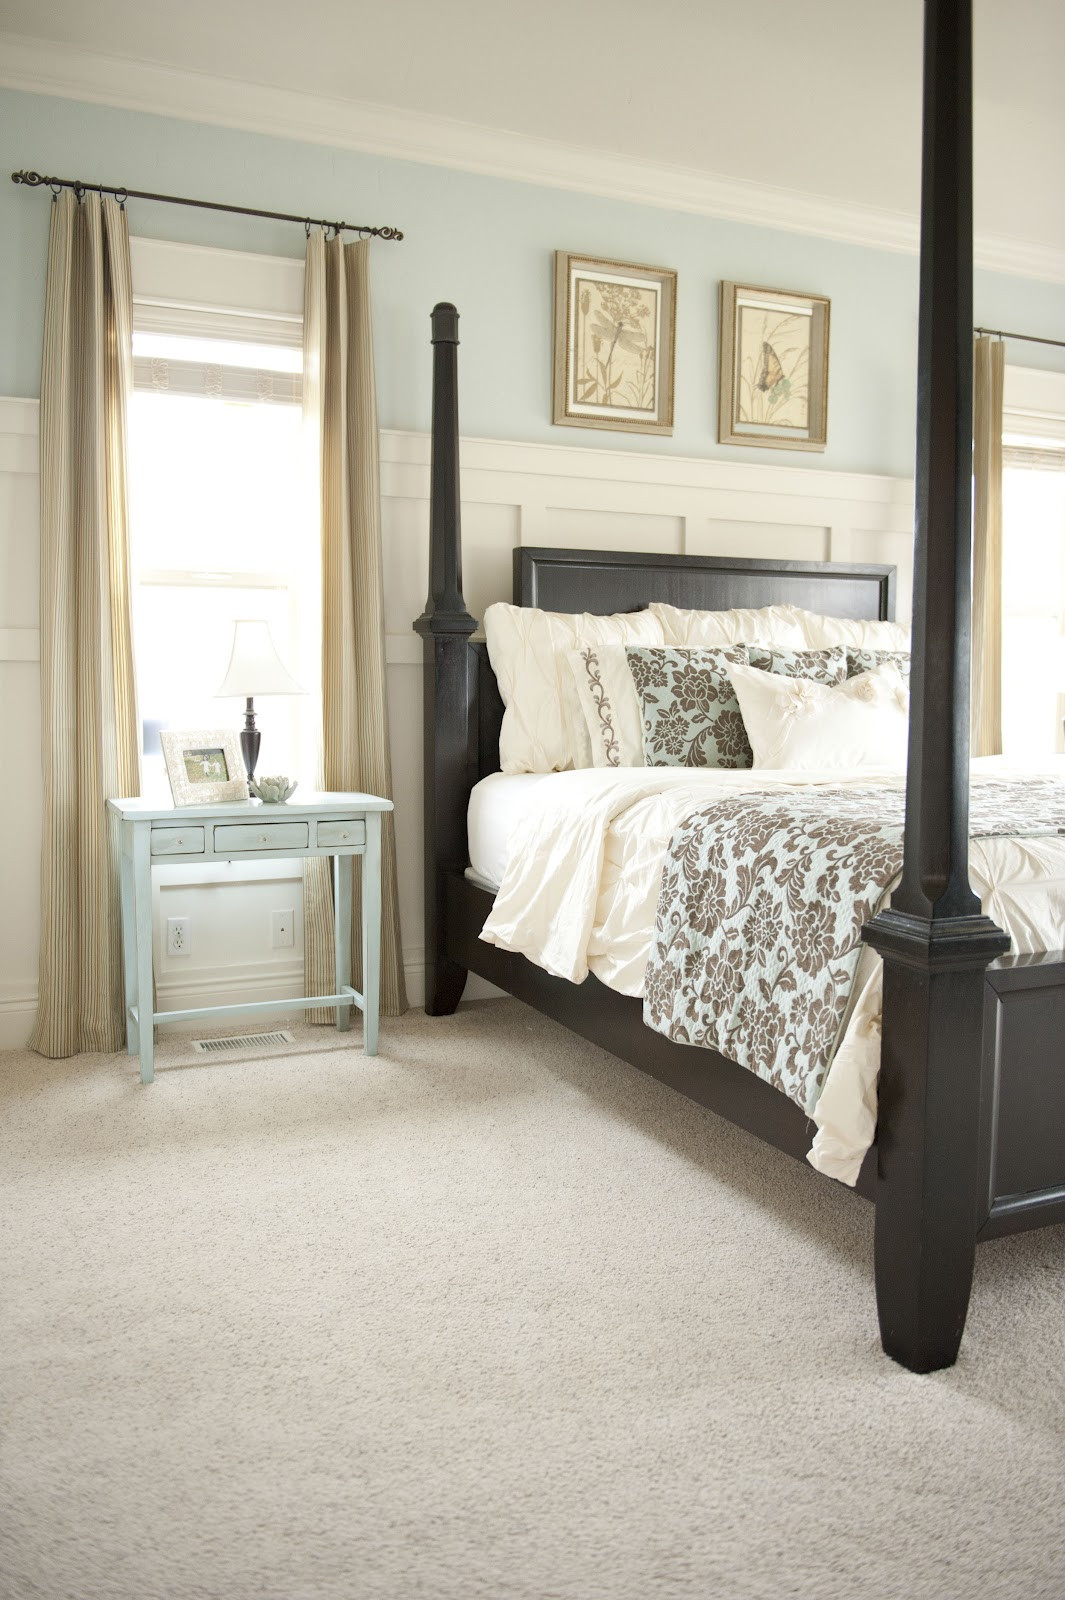 Lowes Paint Colors For Bedrooms
 Paint Colors in My Home Sita Montgomery Interiors